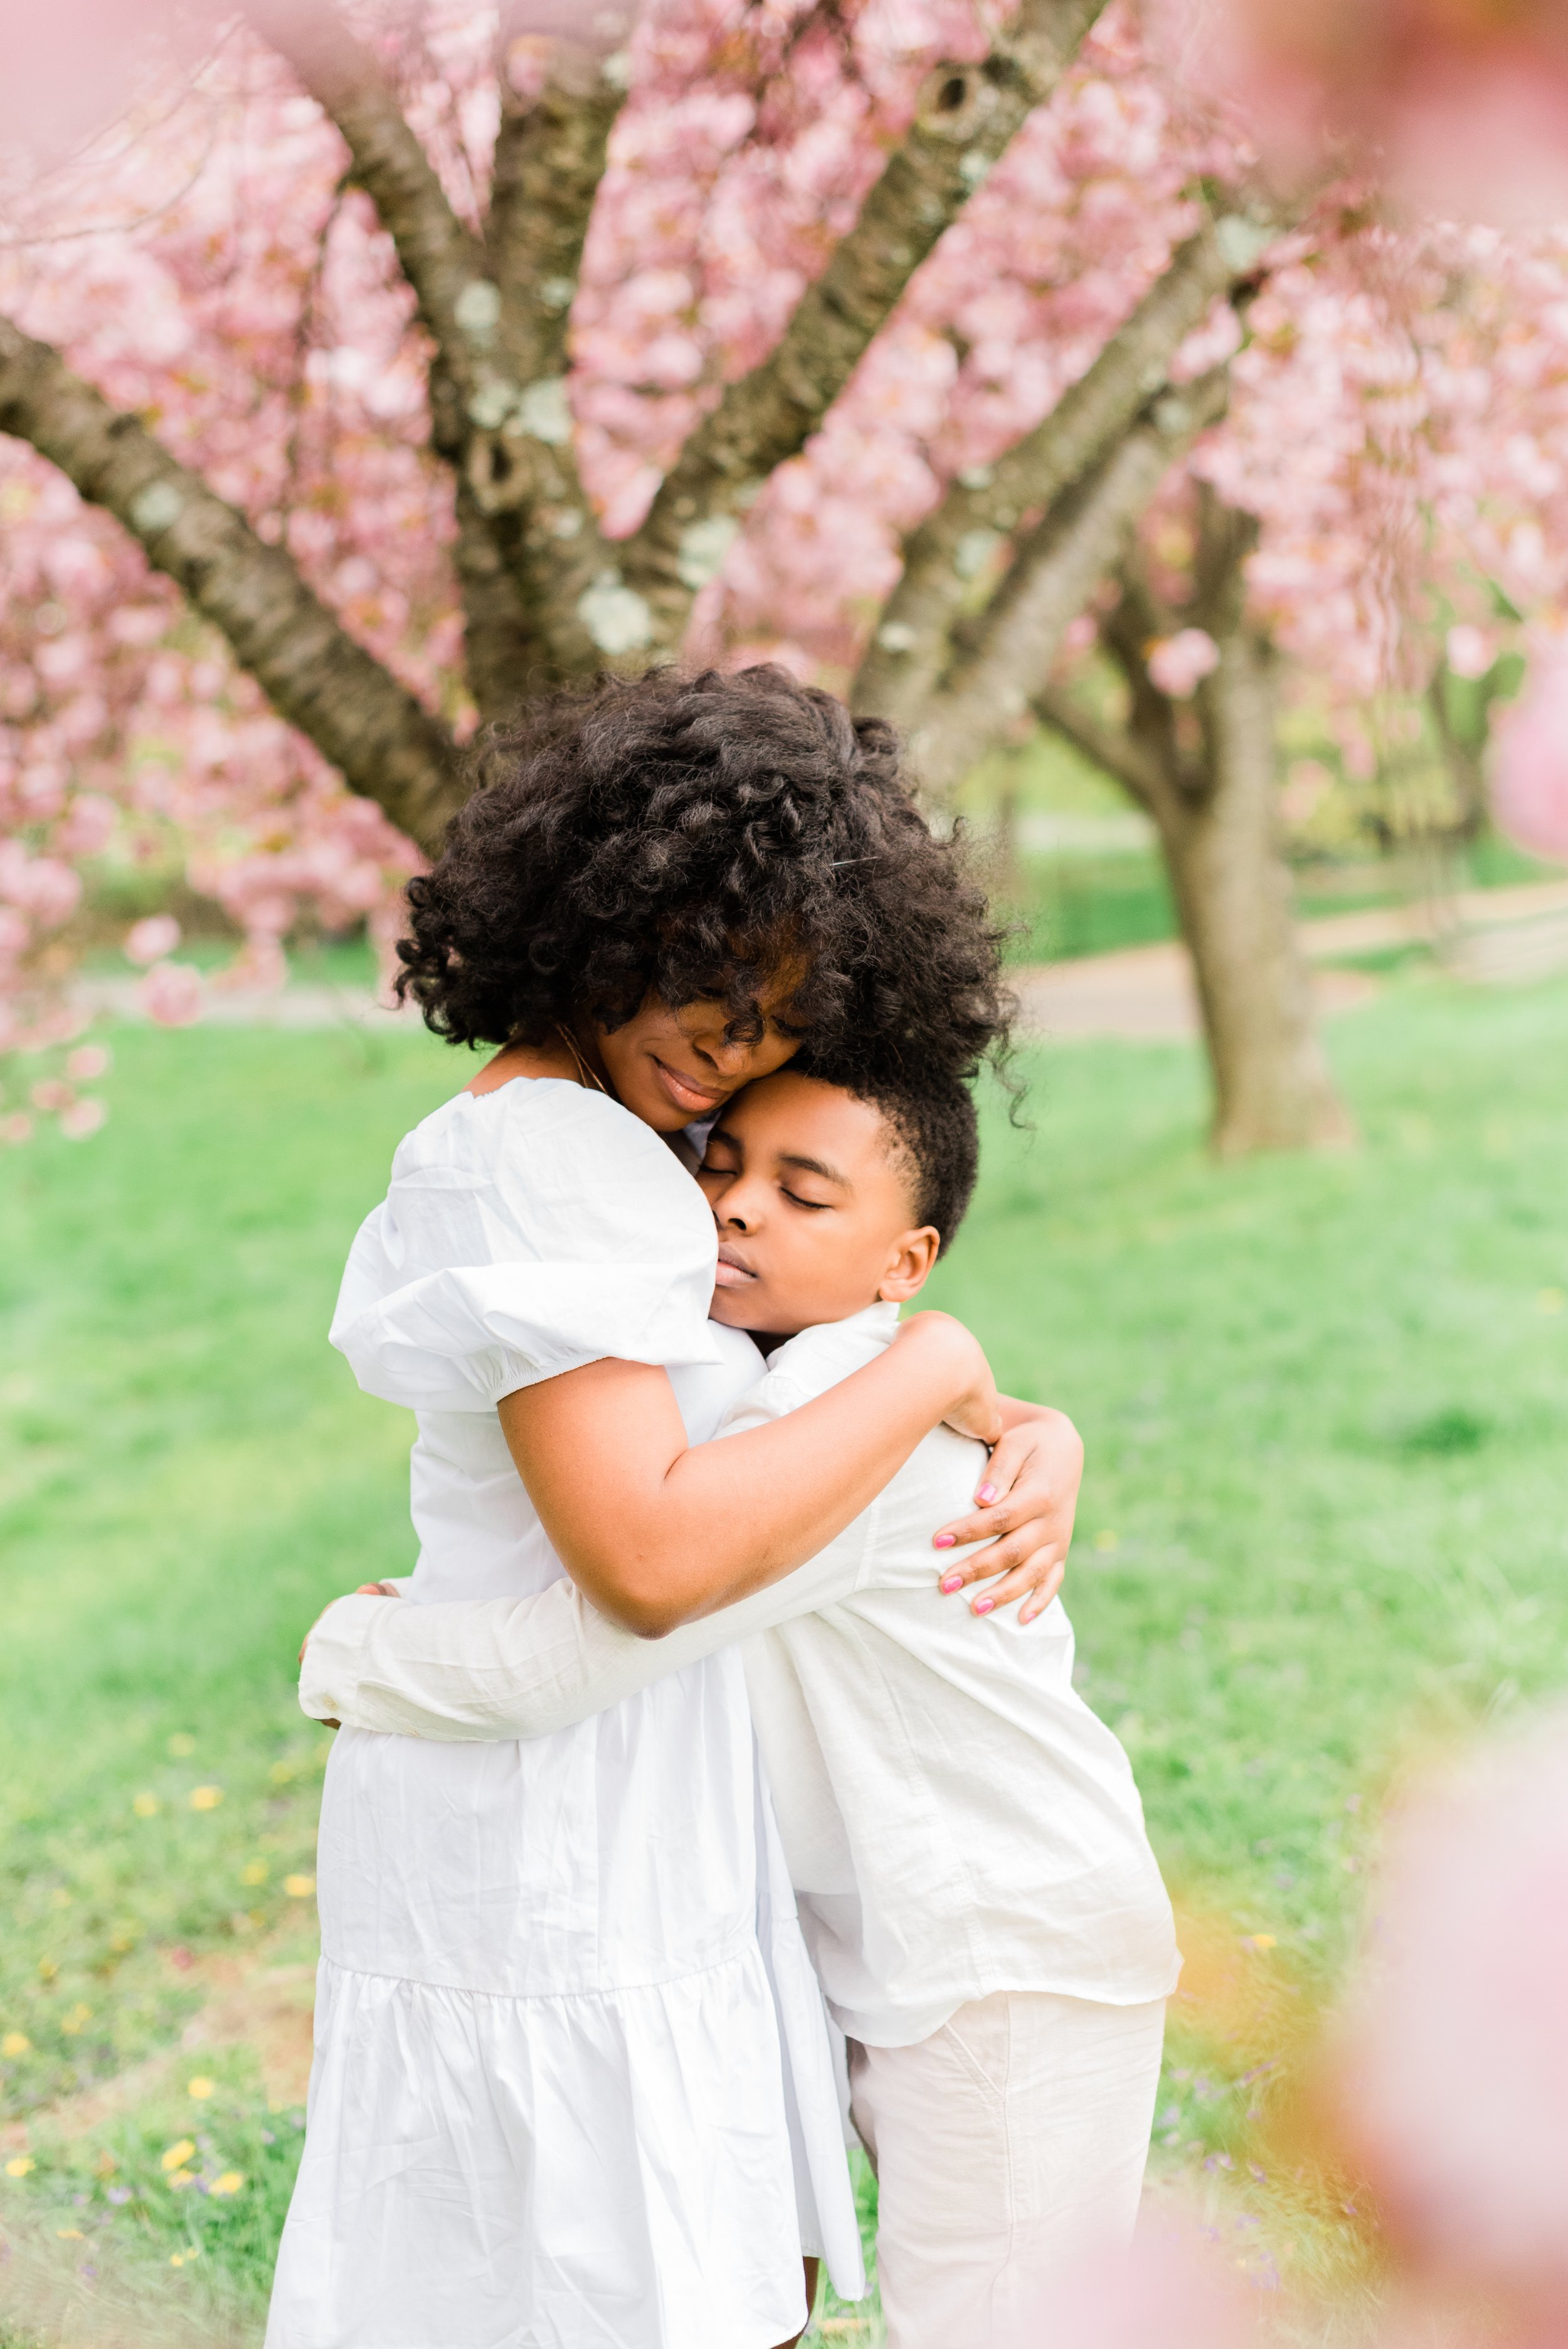  The blossoming trees are the perfect background for these siblings as they embrace each other in this sweet photo captured by Jacquie Erickson. Blossoming trees sibling love brother and sister Jacquie erickson #brothersisterphoto #blossomsphoto #sib